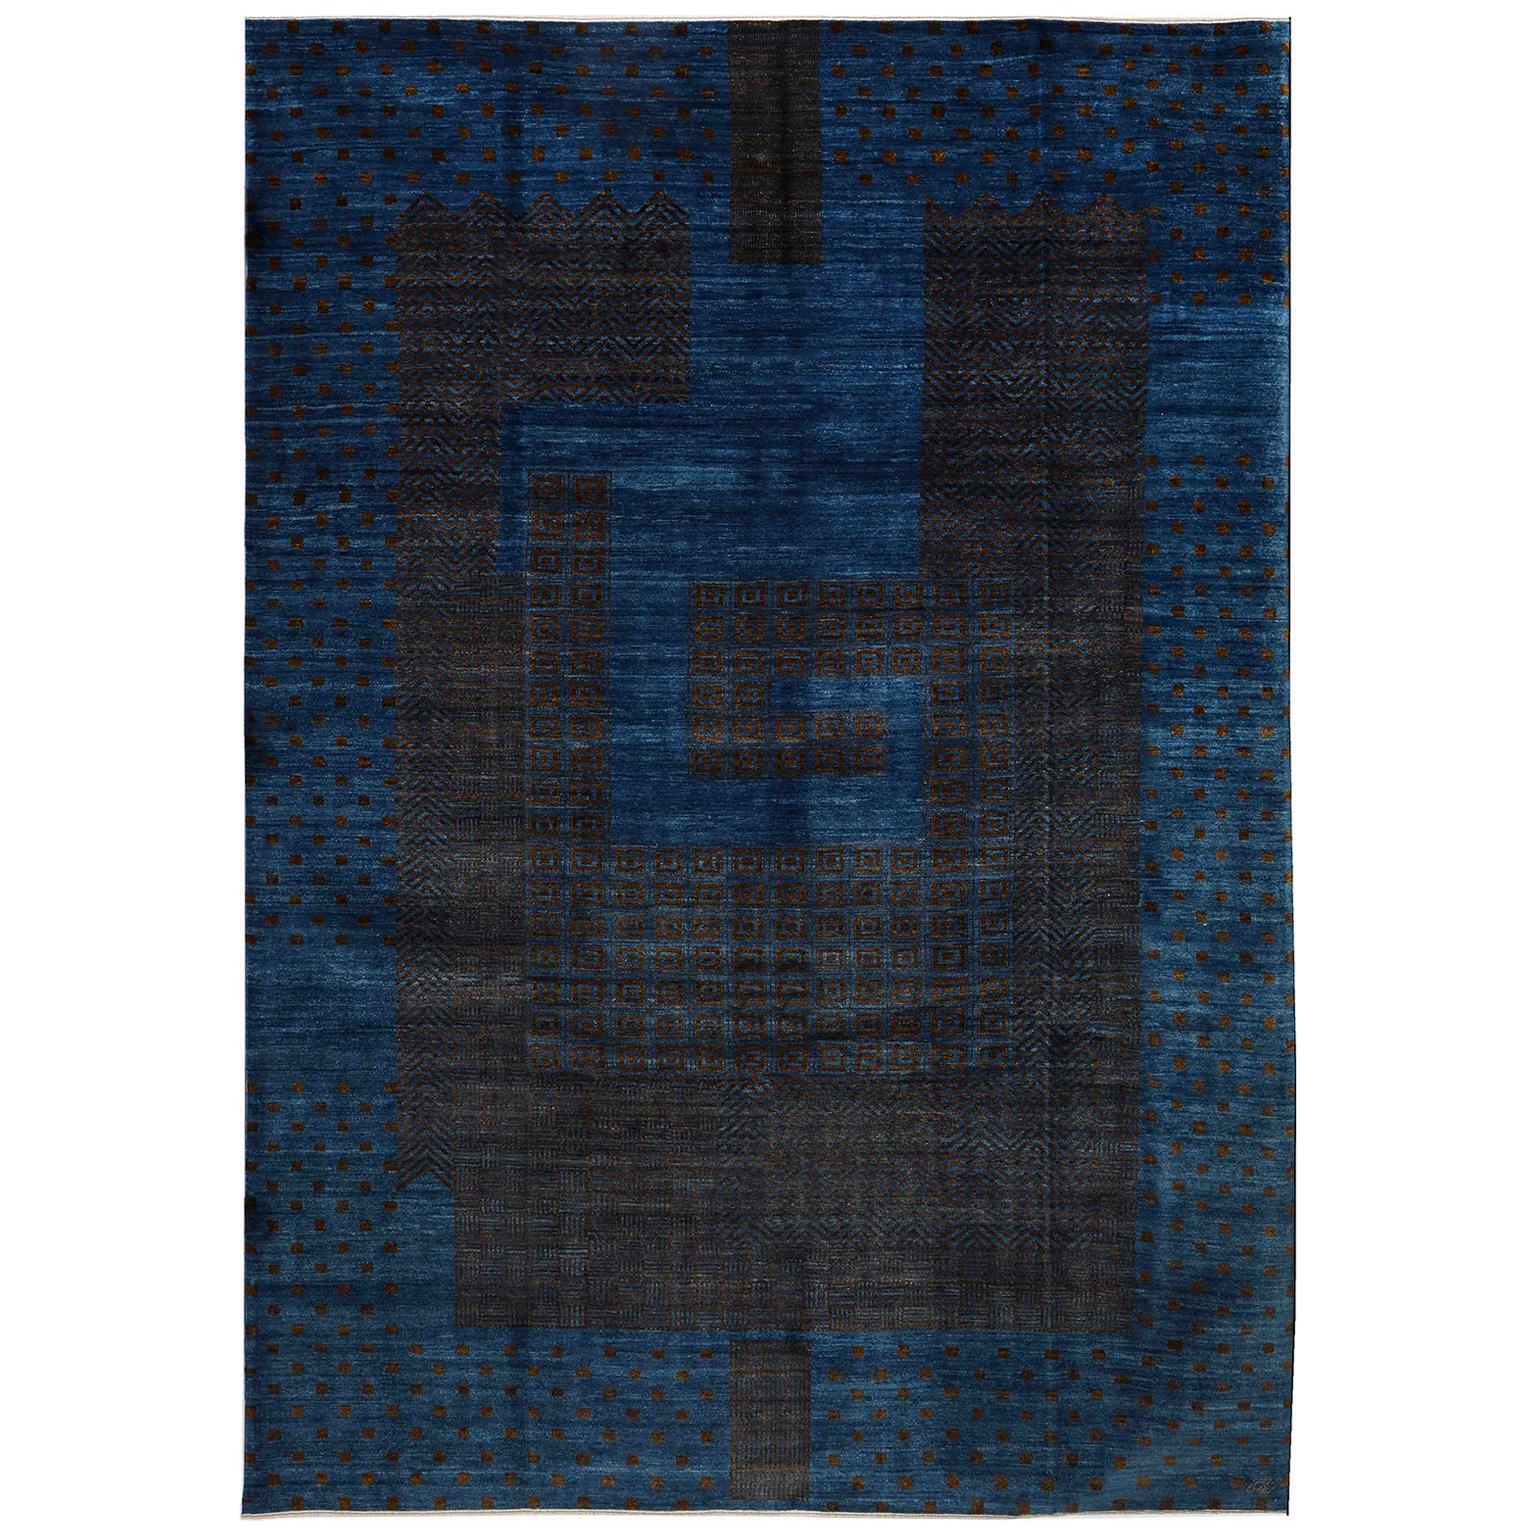 Orley Shabahang Contemporary Wool Persian Rug, Blue and Brown, 9' x 12'